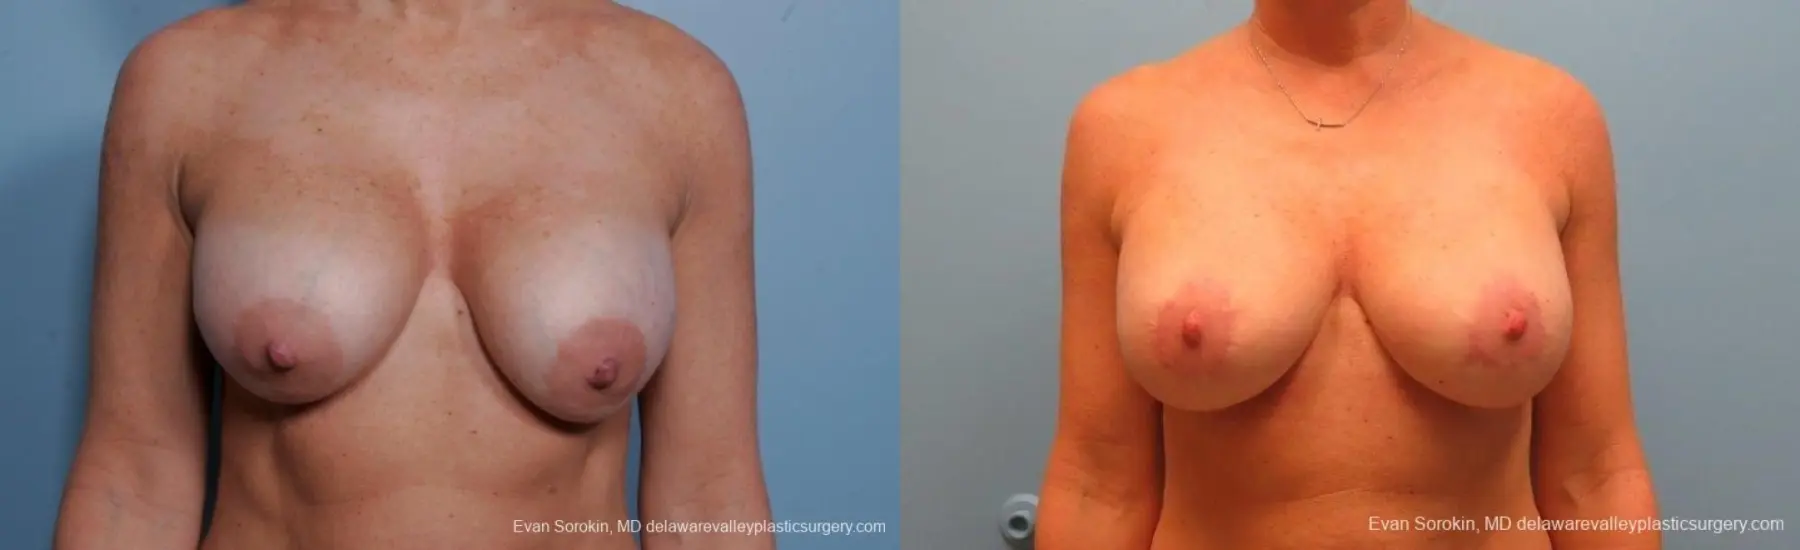 Philadelphia Breast Lift and Augmentation 8690 - Before and After 1